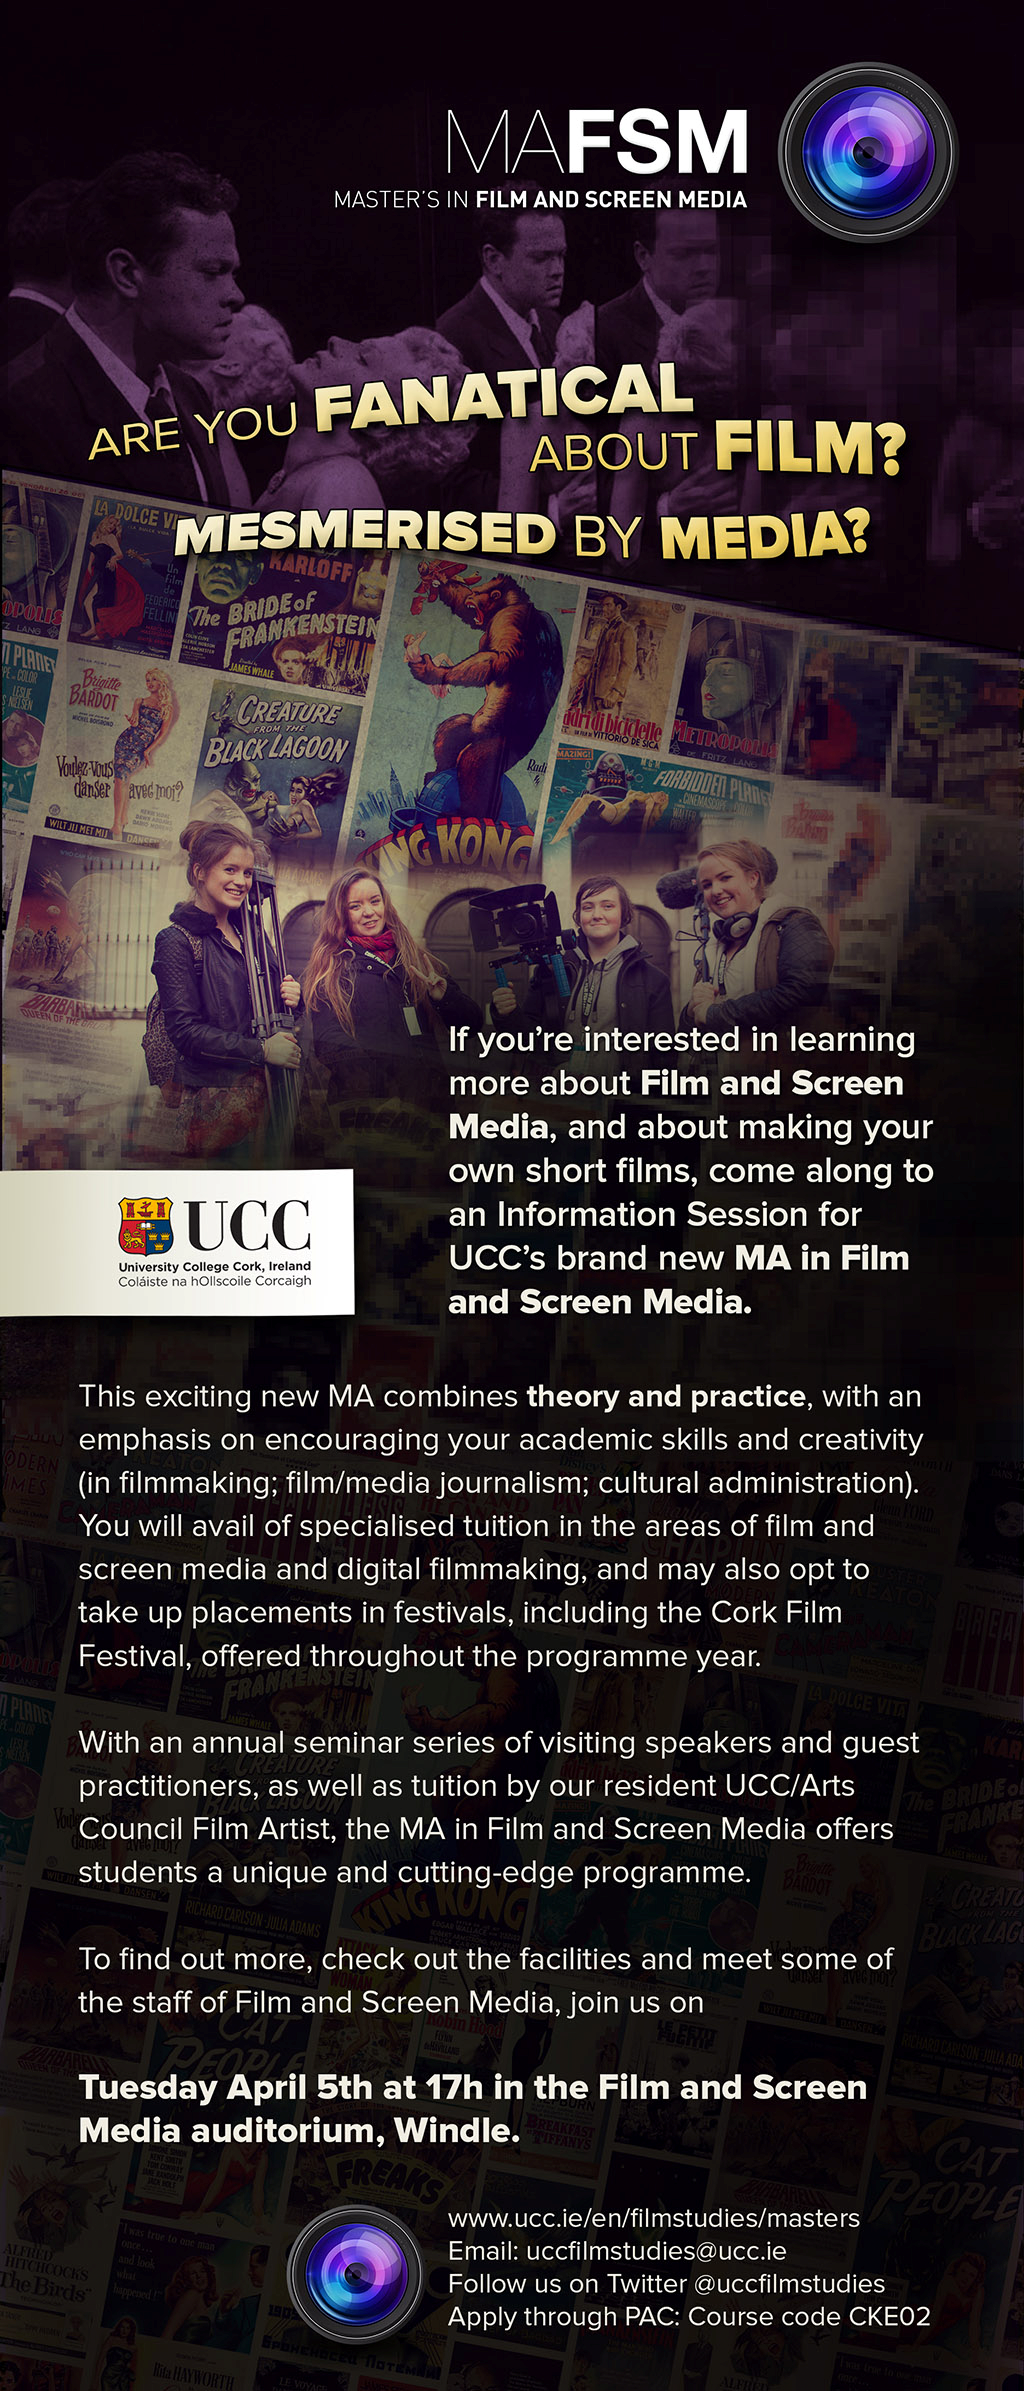 Information Session for new MA in Film and Screen Media